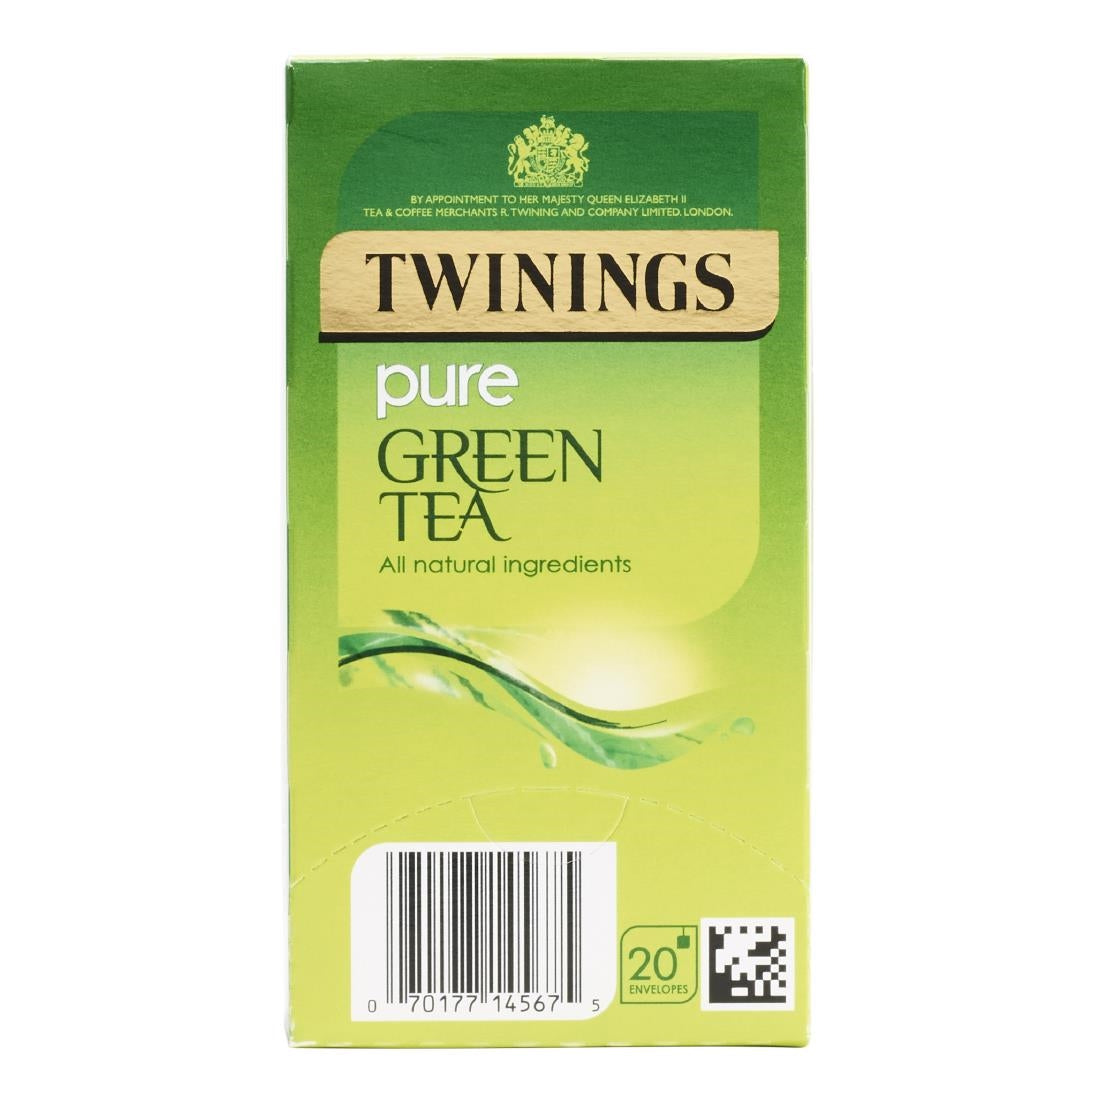 DZ467 Twinings Pure Green Enveloped Tea Bags (Pack of 40)